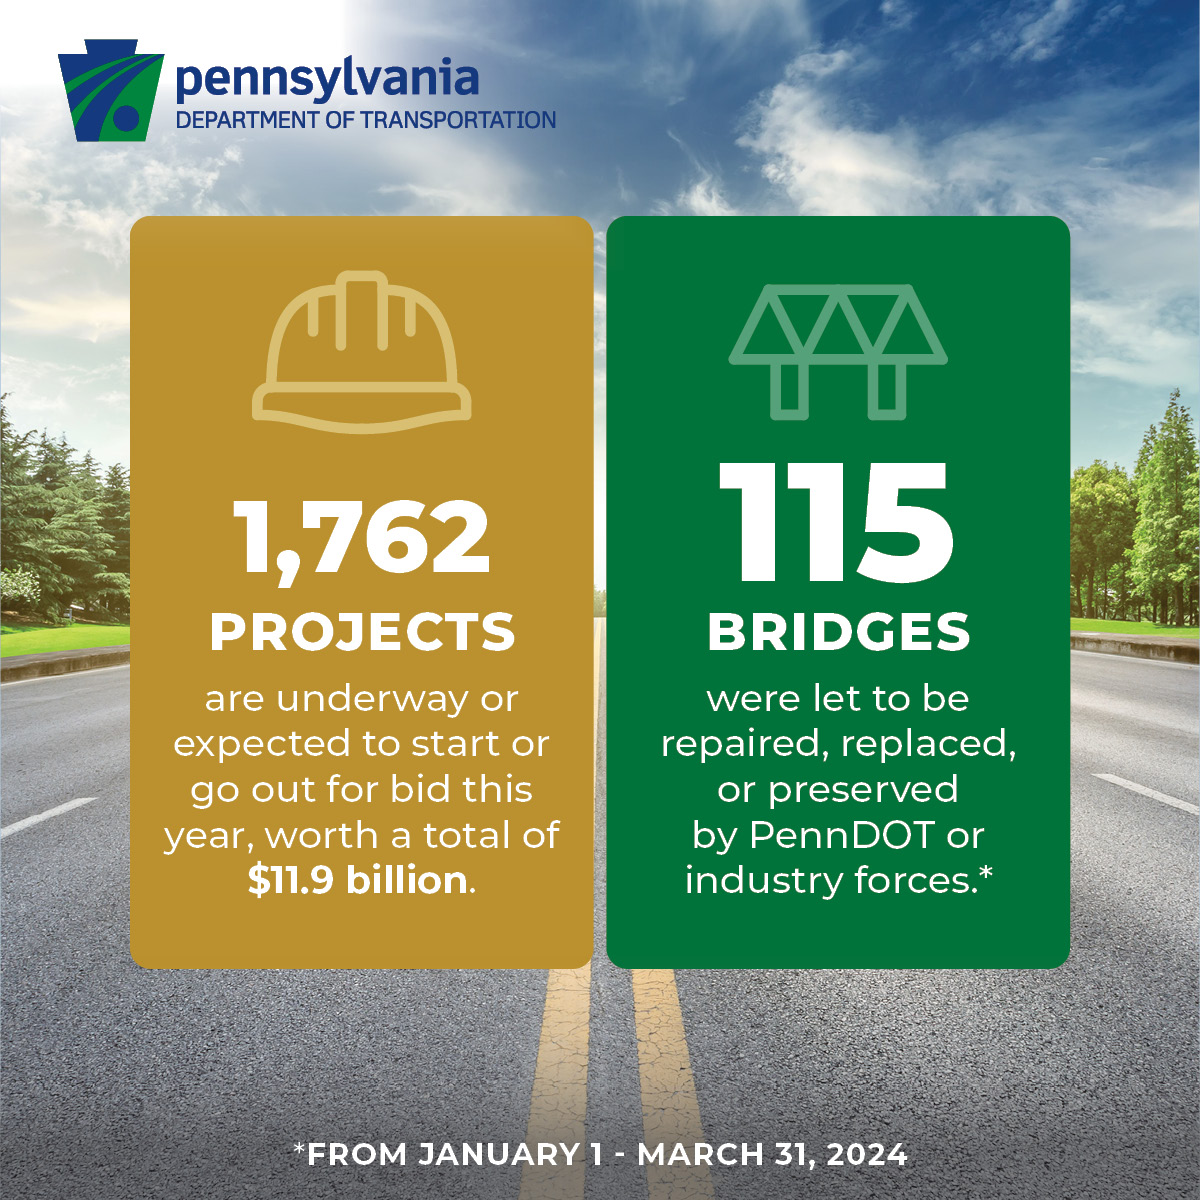 Visit penndot.pa.gov/results to see all the ways we're working for you across Pennsylvania. #PennDOTResults